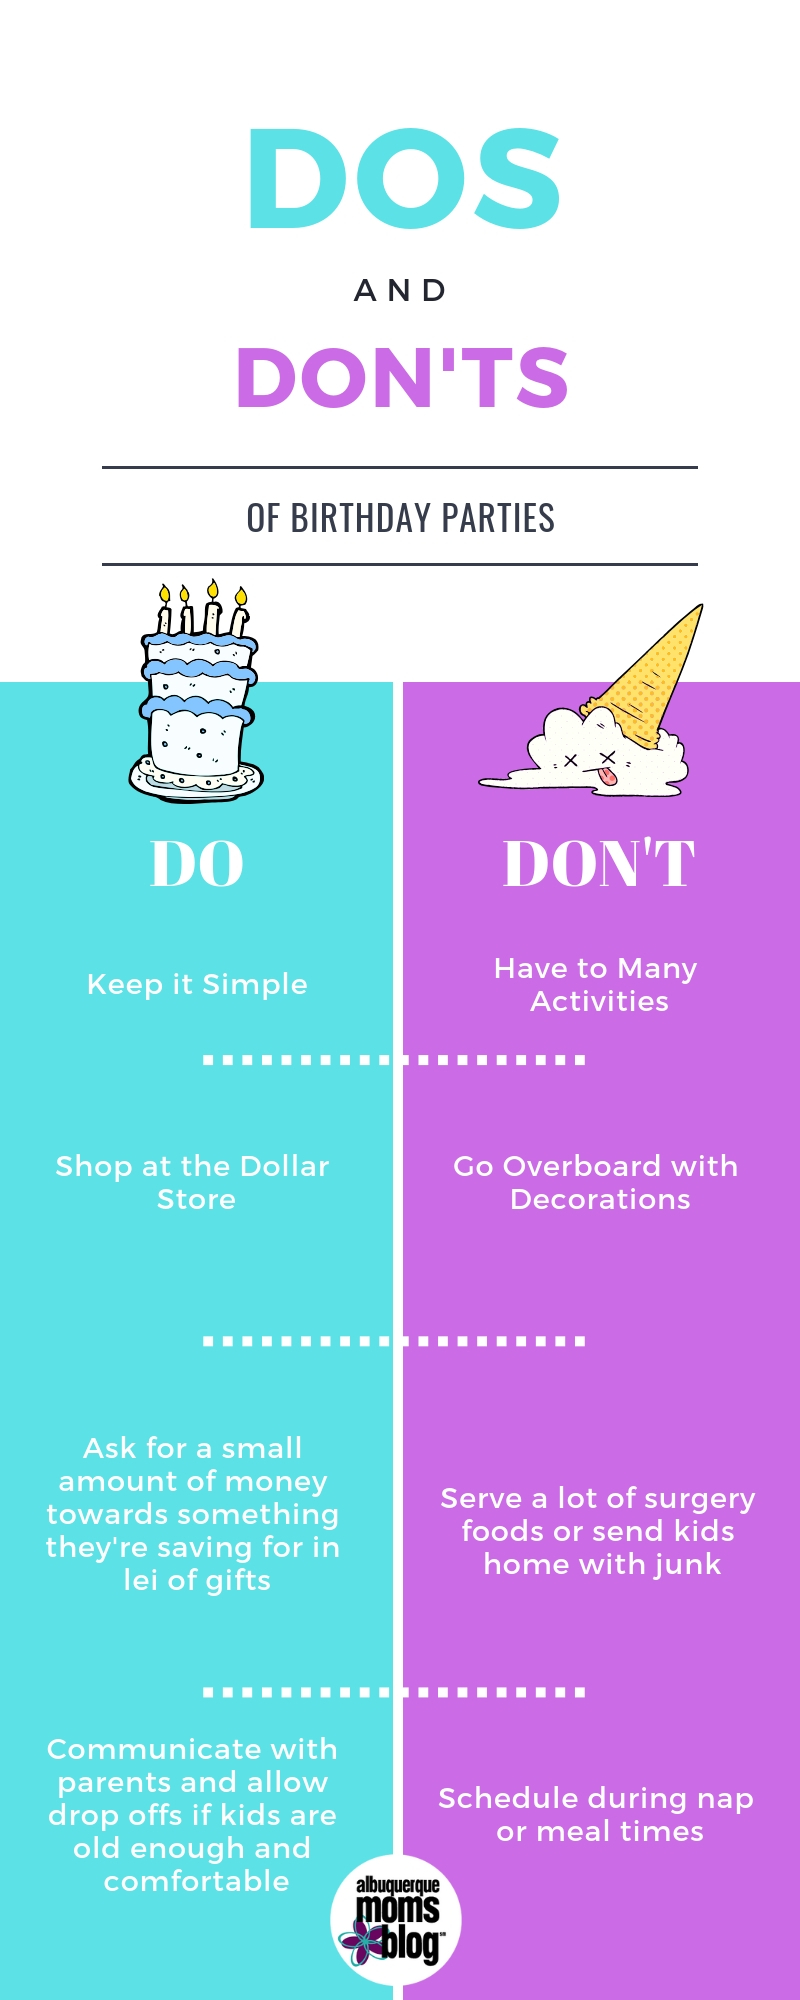 Dos and Don'ts of Kids' Birthday Parties by the Albuquerque Moms Blog